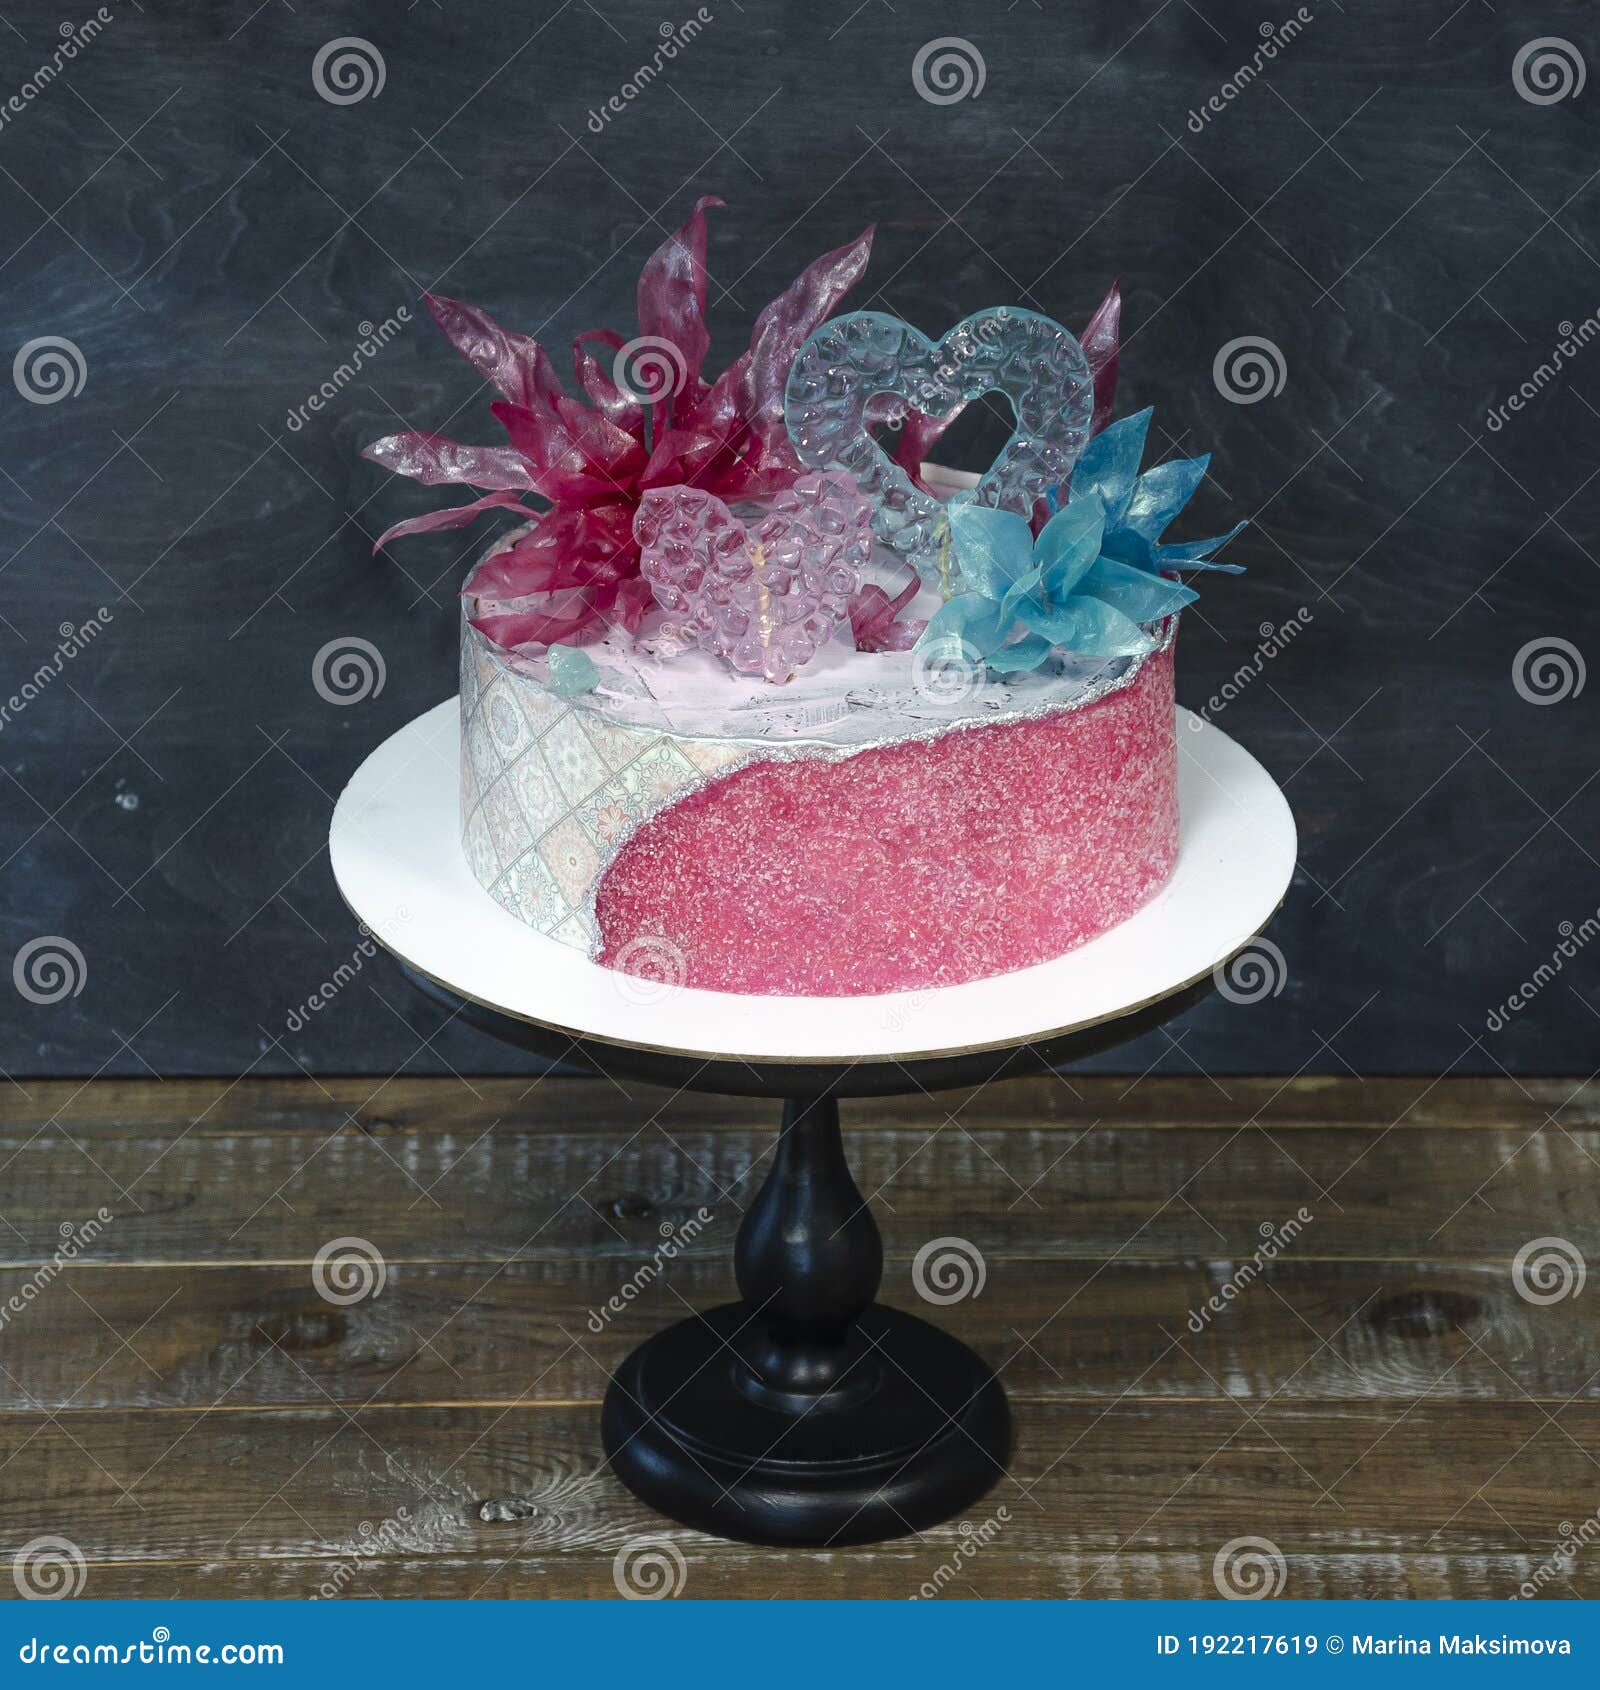 Pink Blue Sugar Sheet Cake With Caramel And Rice Paper Decoration Stock  Image - Image Of Caramel, Fest: 192217619